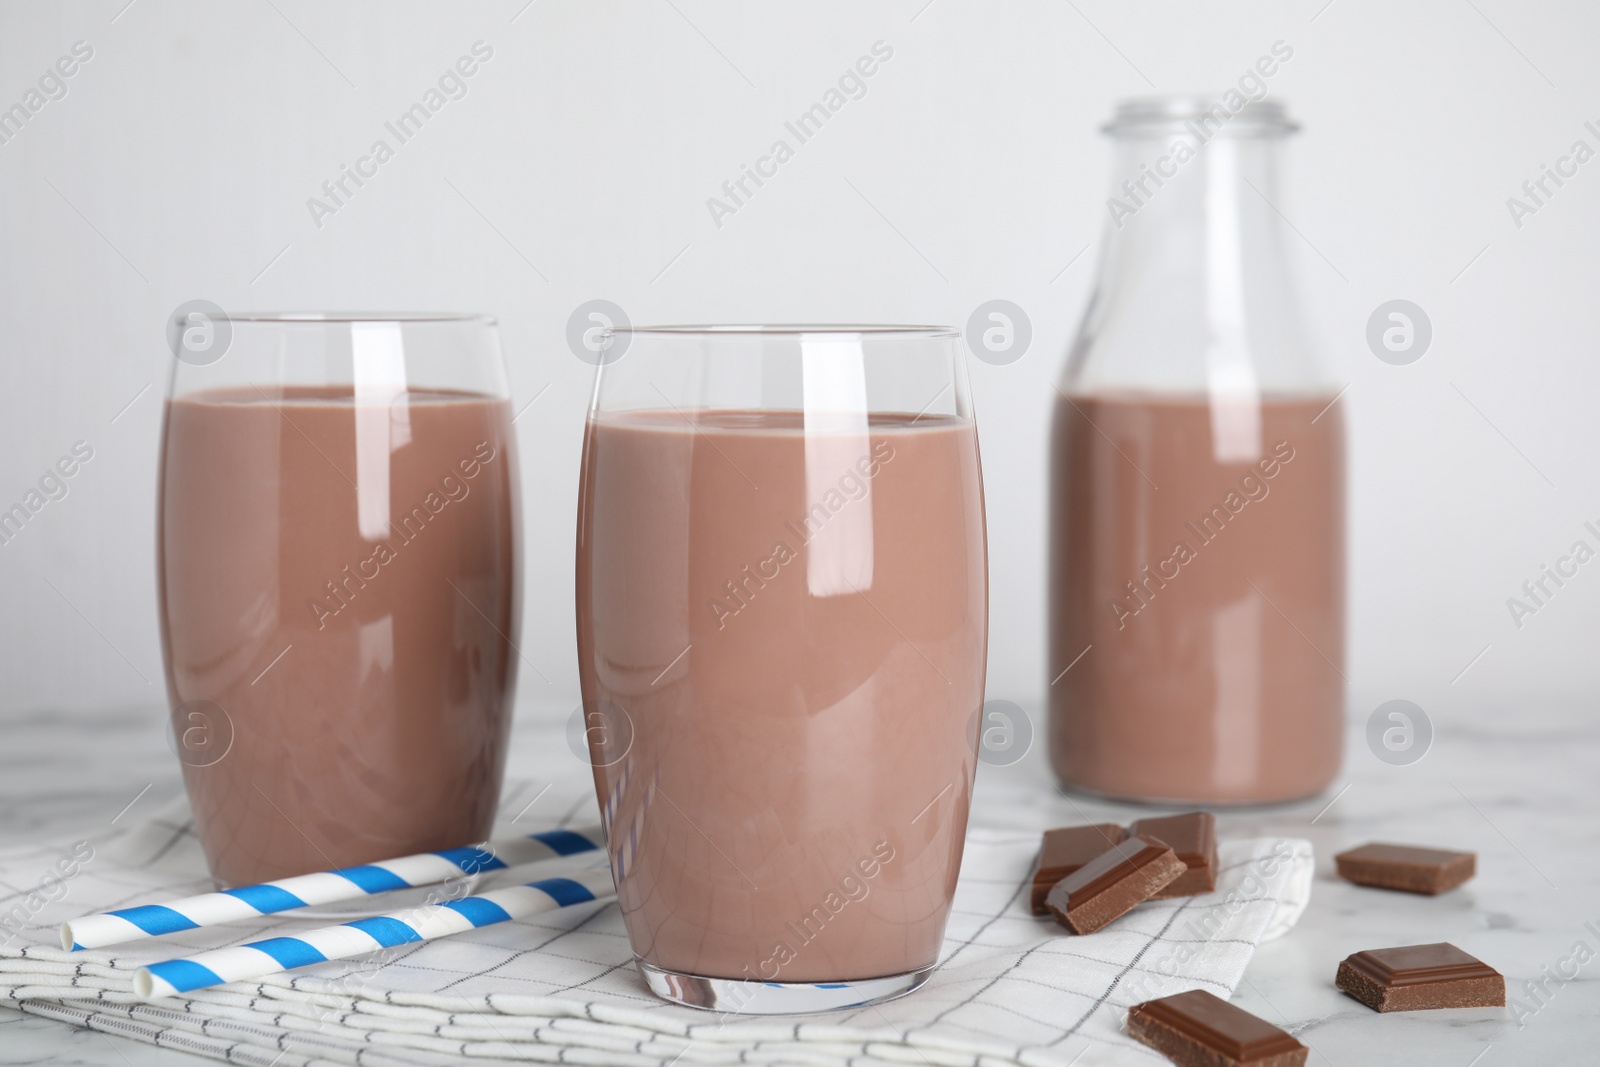 Photo of Delicious chocolate in glasses and bottle of milk on table